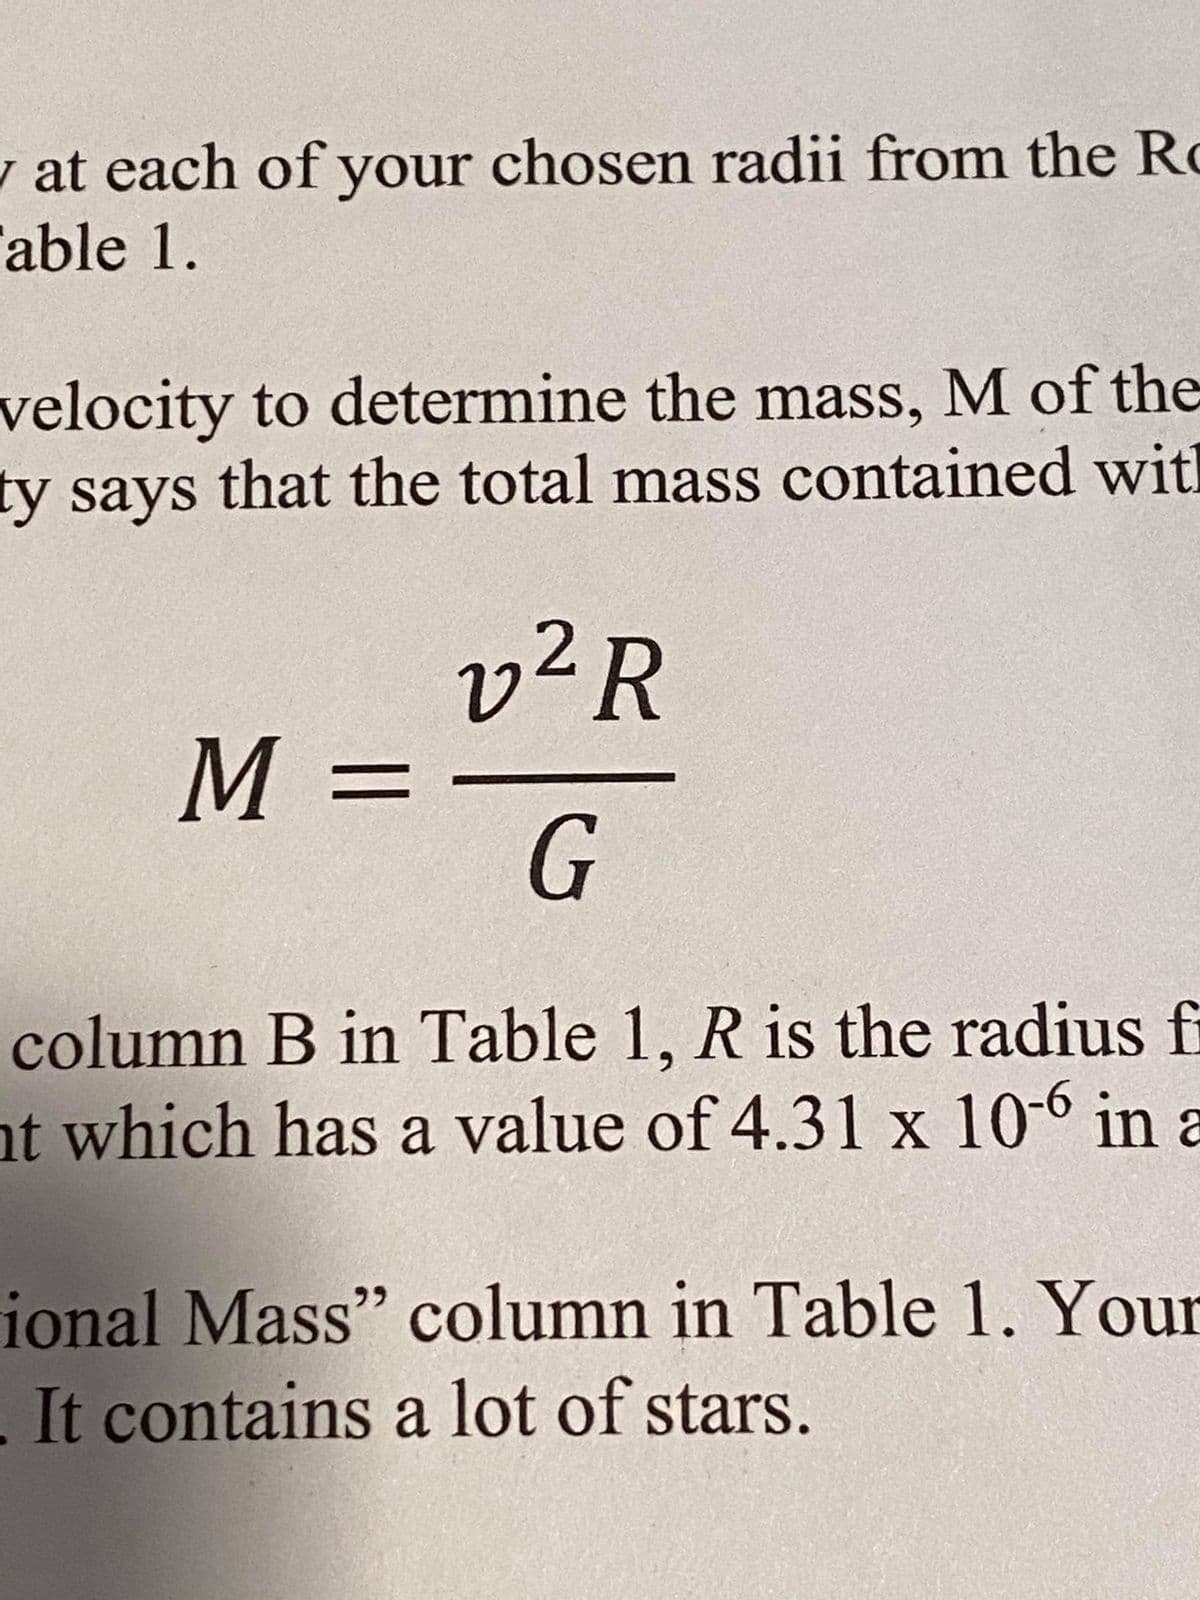 w at each of your chosen radii from the Ro
able 1.
velocity to determine the mass, M of the
ty says that the total mass contained wit
v²R
M =
column B in Table 1, R is the radius f
nt which has a value of 4.31 x 10-6 in a
X
10r
ional Mass" column in Table 1. Your
. It contains a lot of stars.
